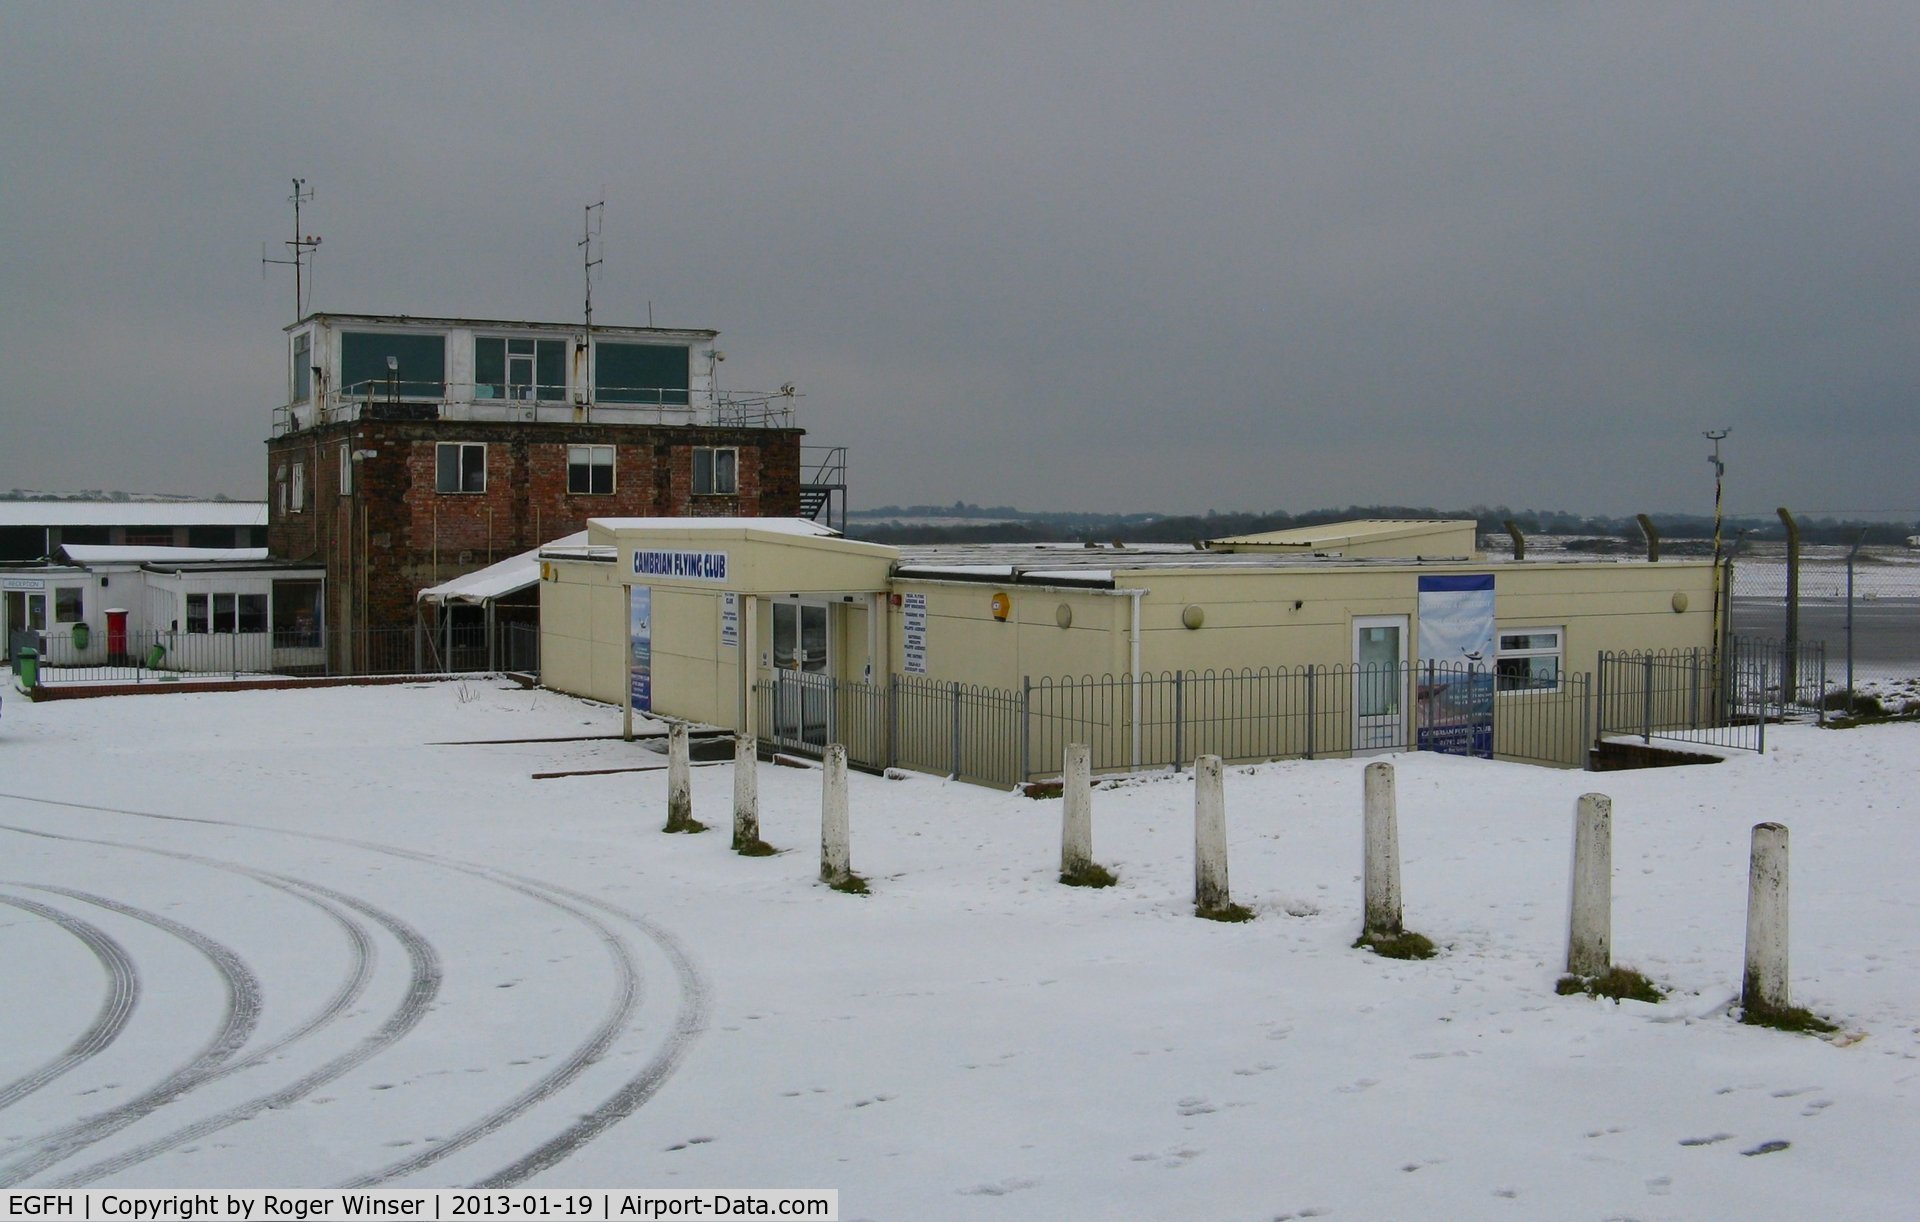 Swansea Airport, Swansea, Wales United Kingdom (EGFH) - Control Tower and Cambrian Flying Club HQ at Swansea Airport. Winter Grey 2013.